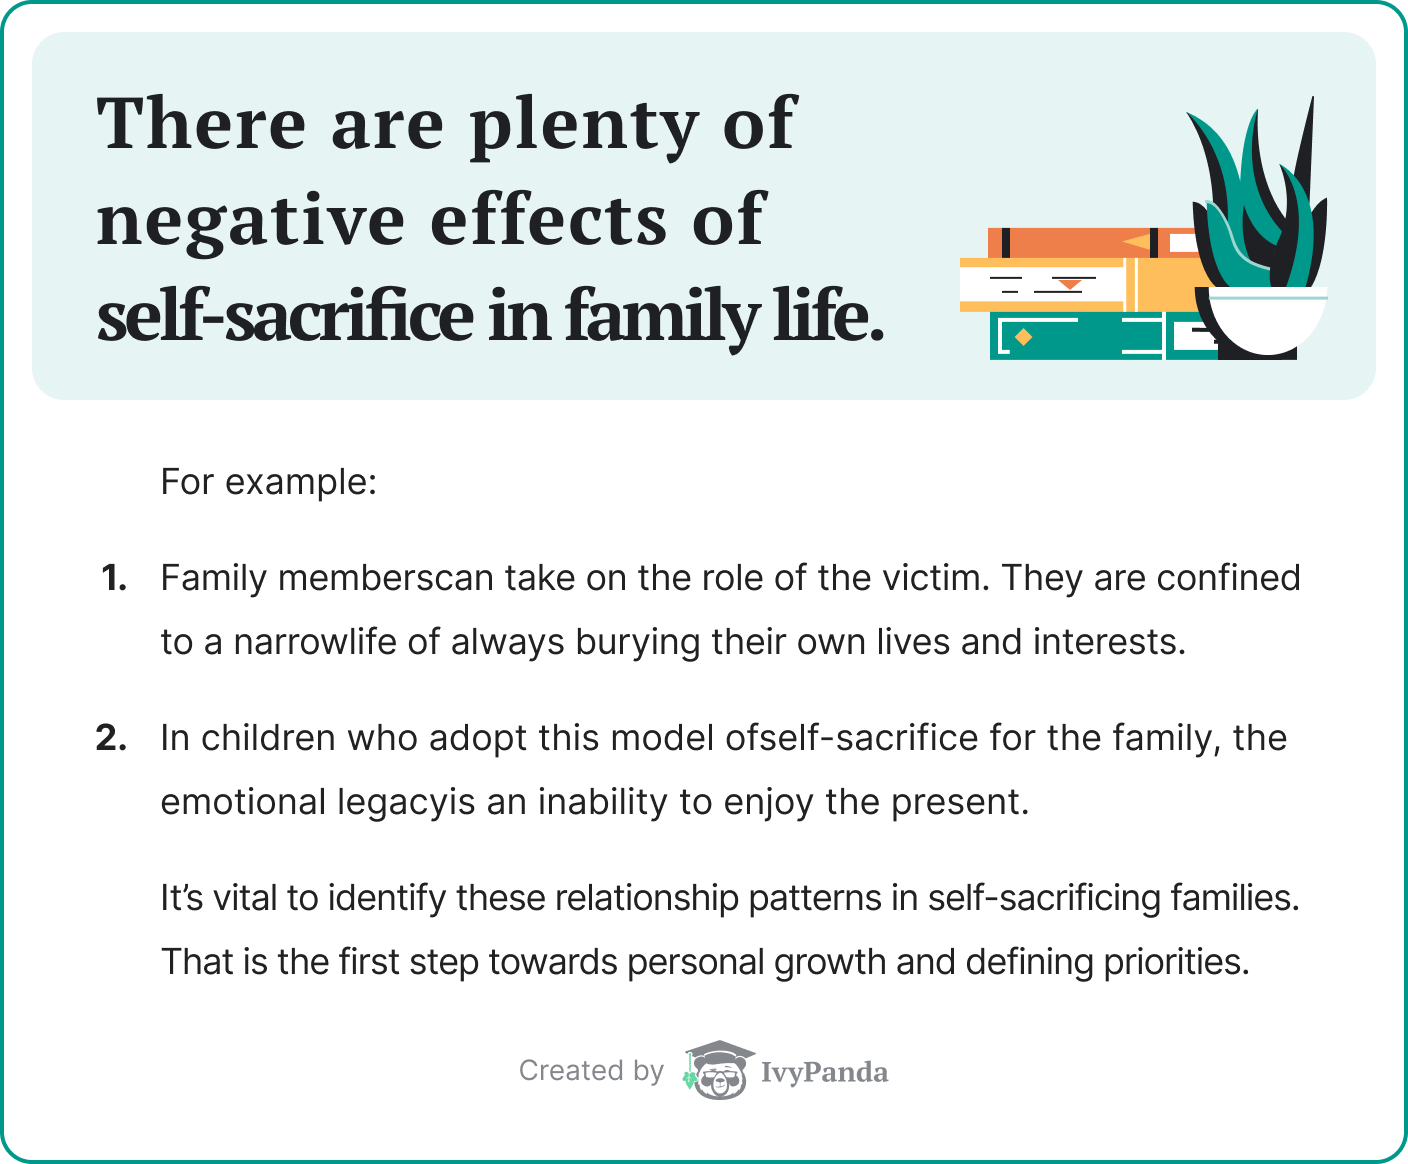 There are plenty of negative effects of self-sacrifice in family life.